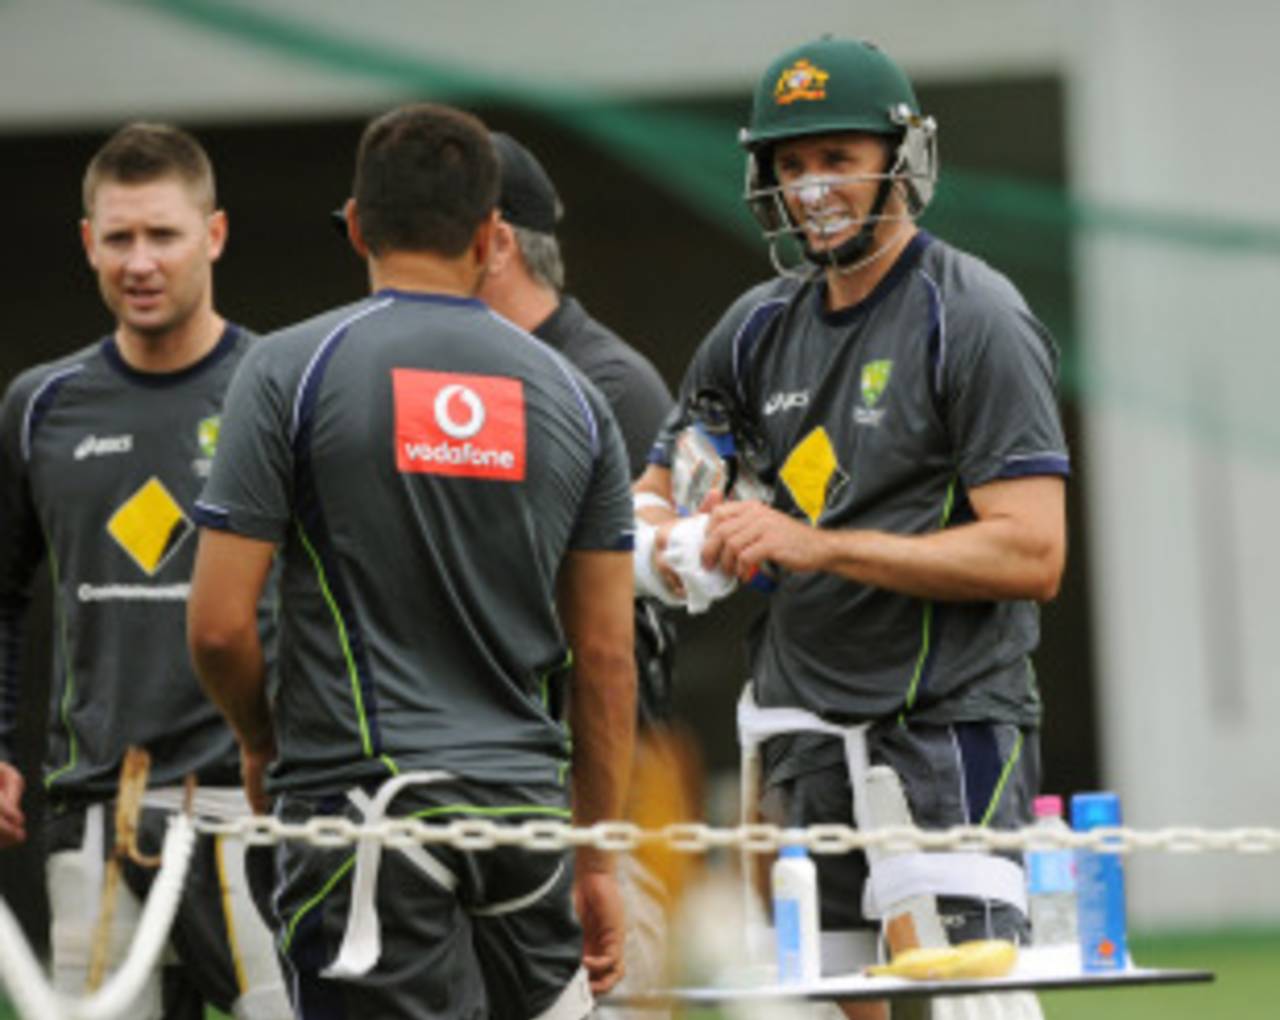 Michael Clarke (left), and Michael Hussey (first from right) speak to team-mates at a training session before the third Test, Australia v Sri Lanka, Sydney, 2 January 2013